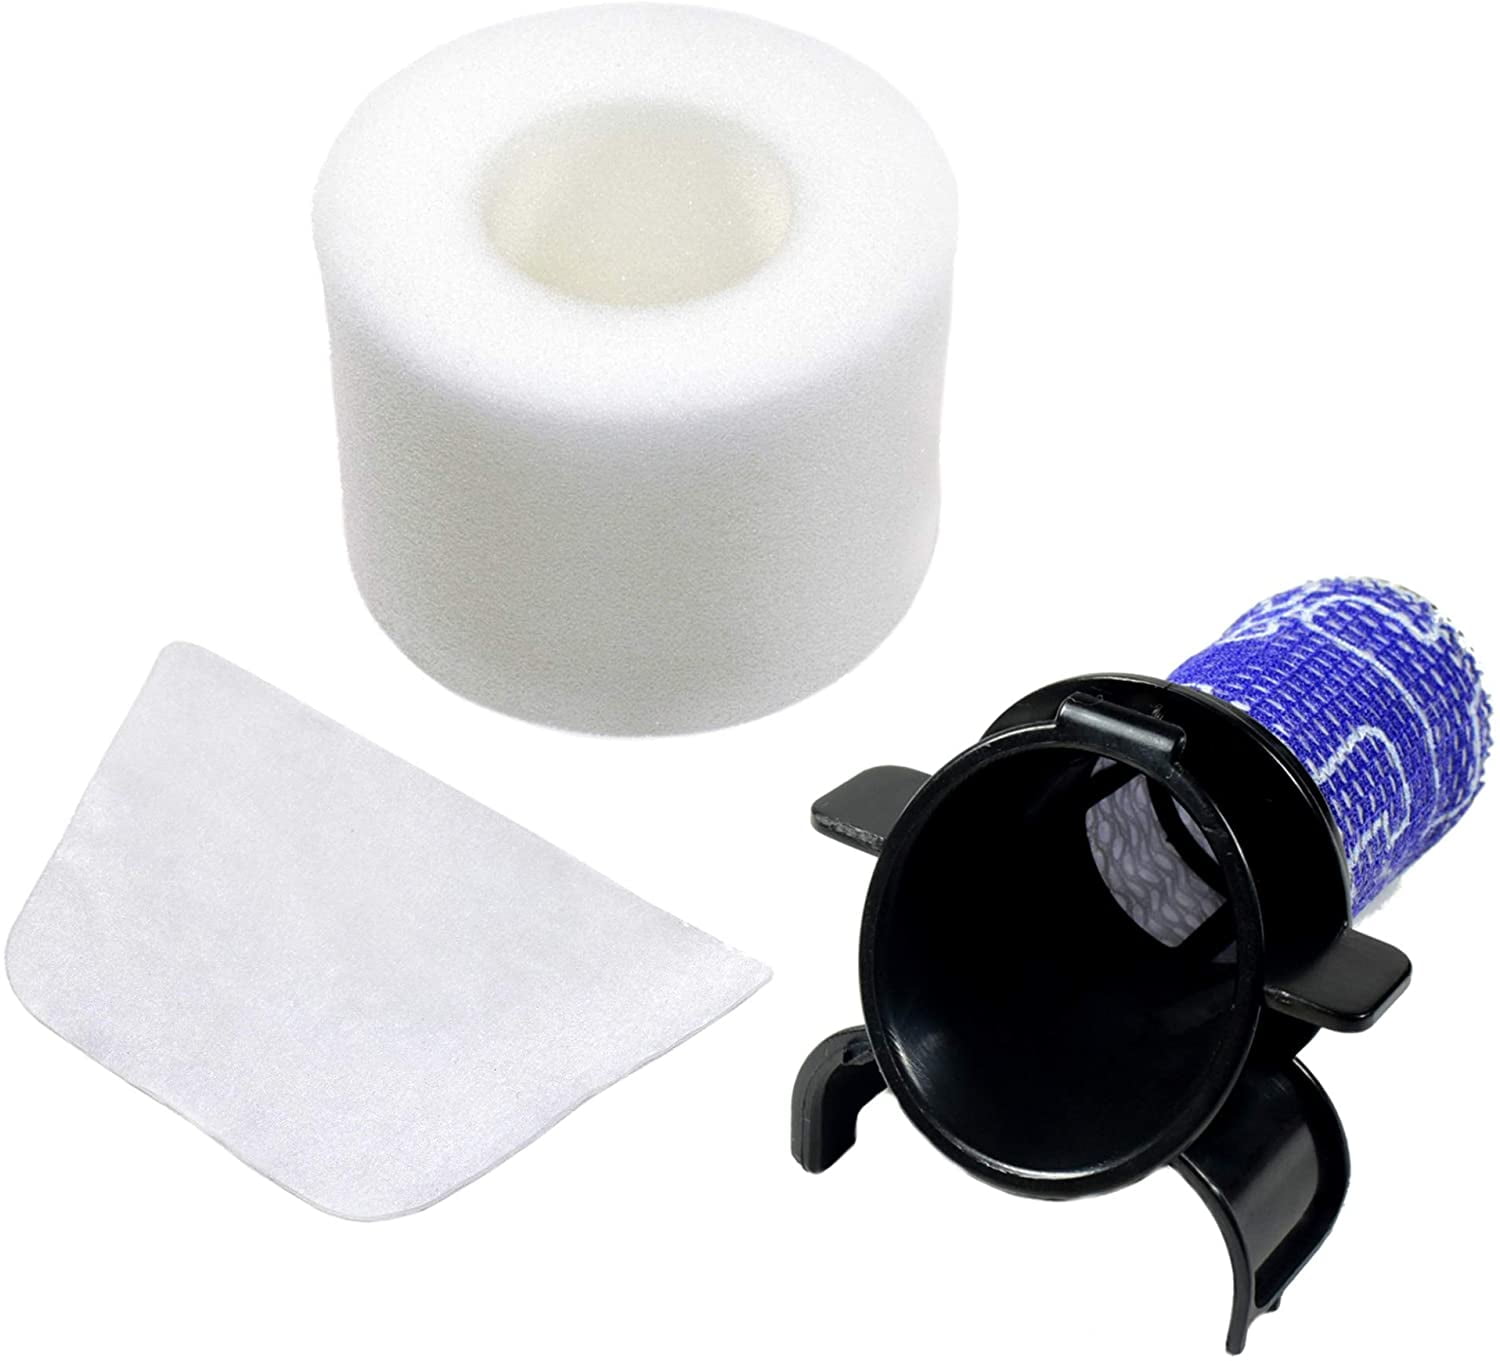 6 Foam IF100 Filters Kit for Shark IONFlex DuoClean Vacuum Filters IF100 IF200 IF251 IF250UKT Replaces Part # XPSTMF100 & XPREMF100 Artraise Replacement Filters for Shark 3 HEPA 